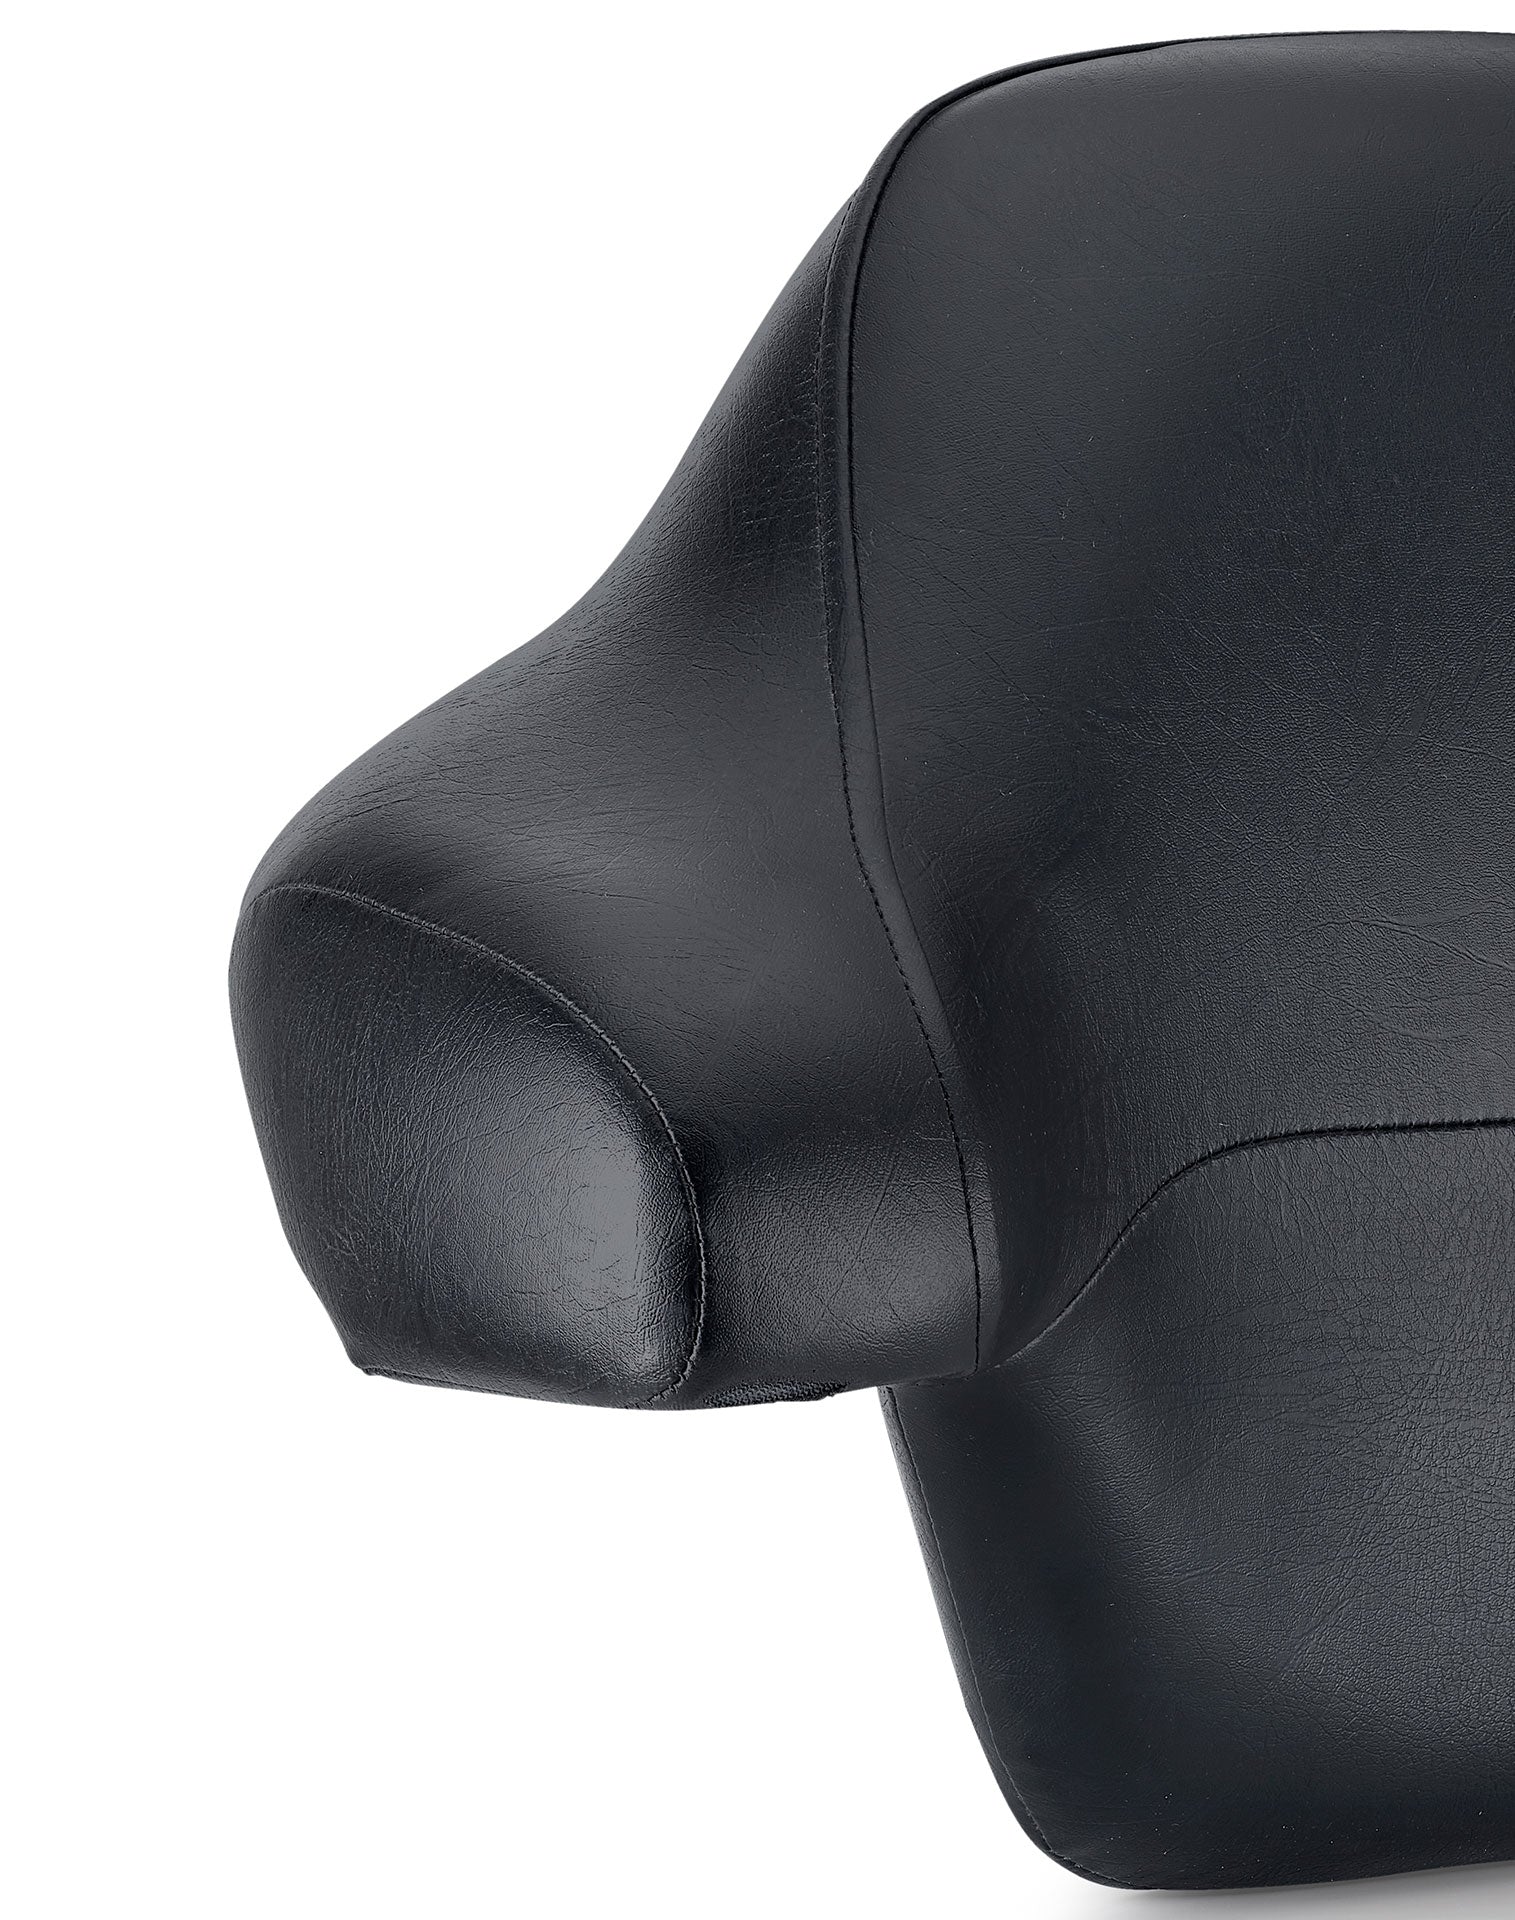 Viking Premium Tour Pack Backrest Pad For Harley Street Glide Close Up View